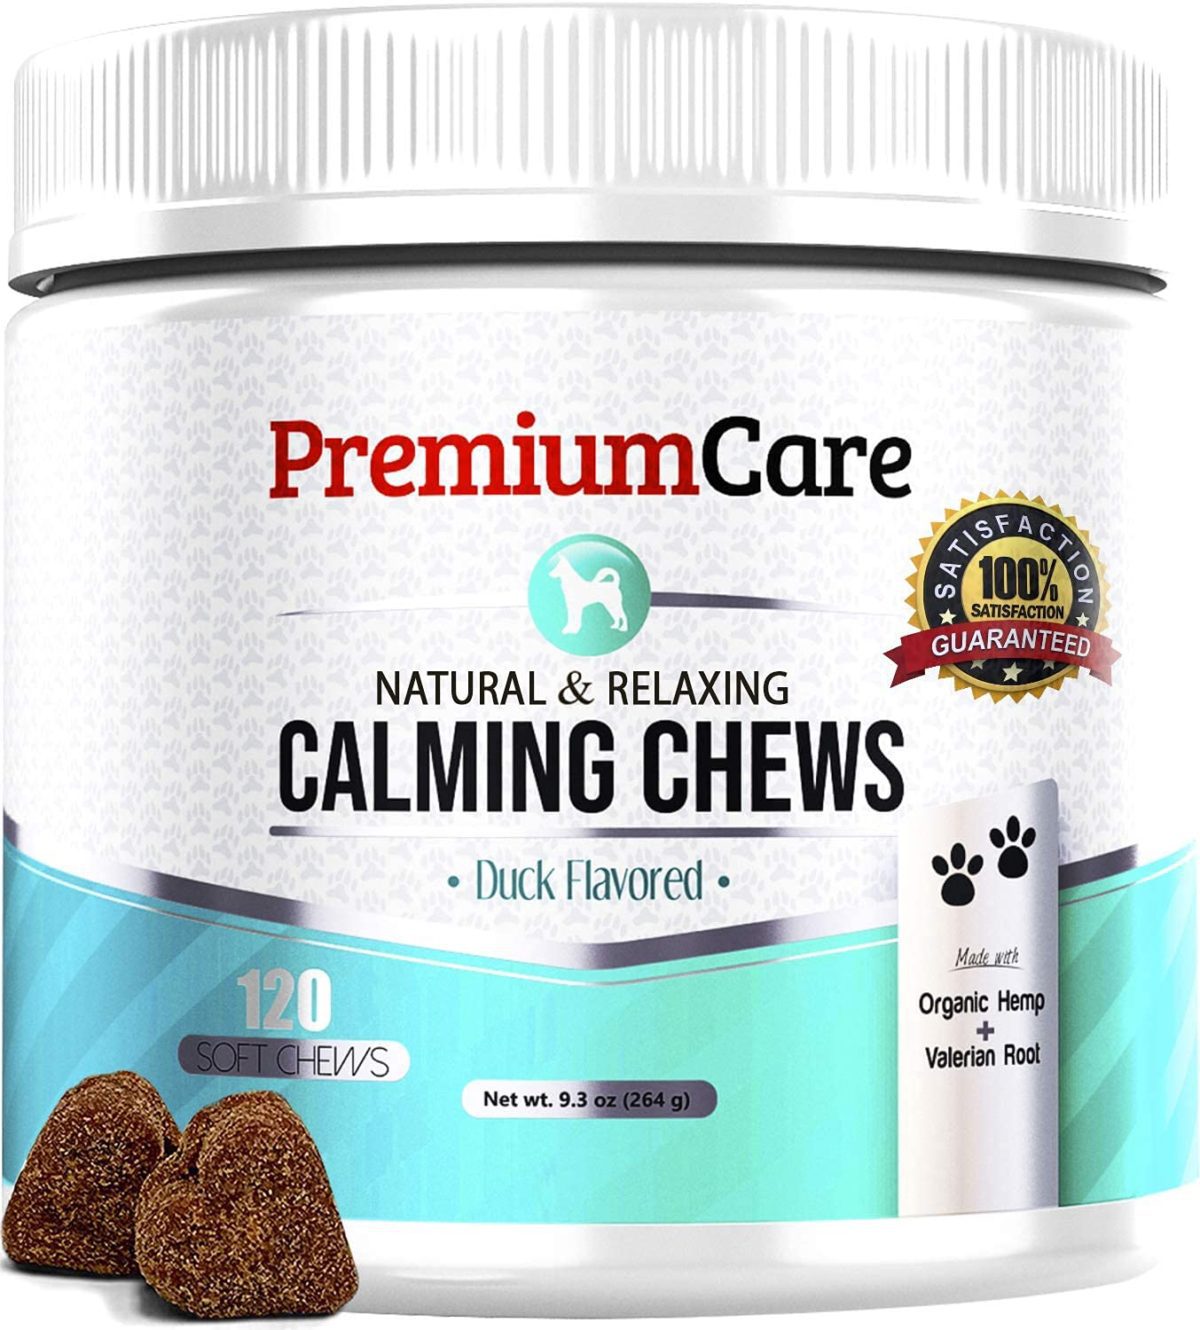 Calming Treats for Dogs Helps with Dog Anxiety